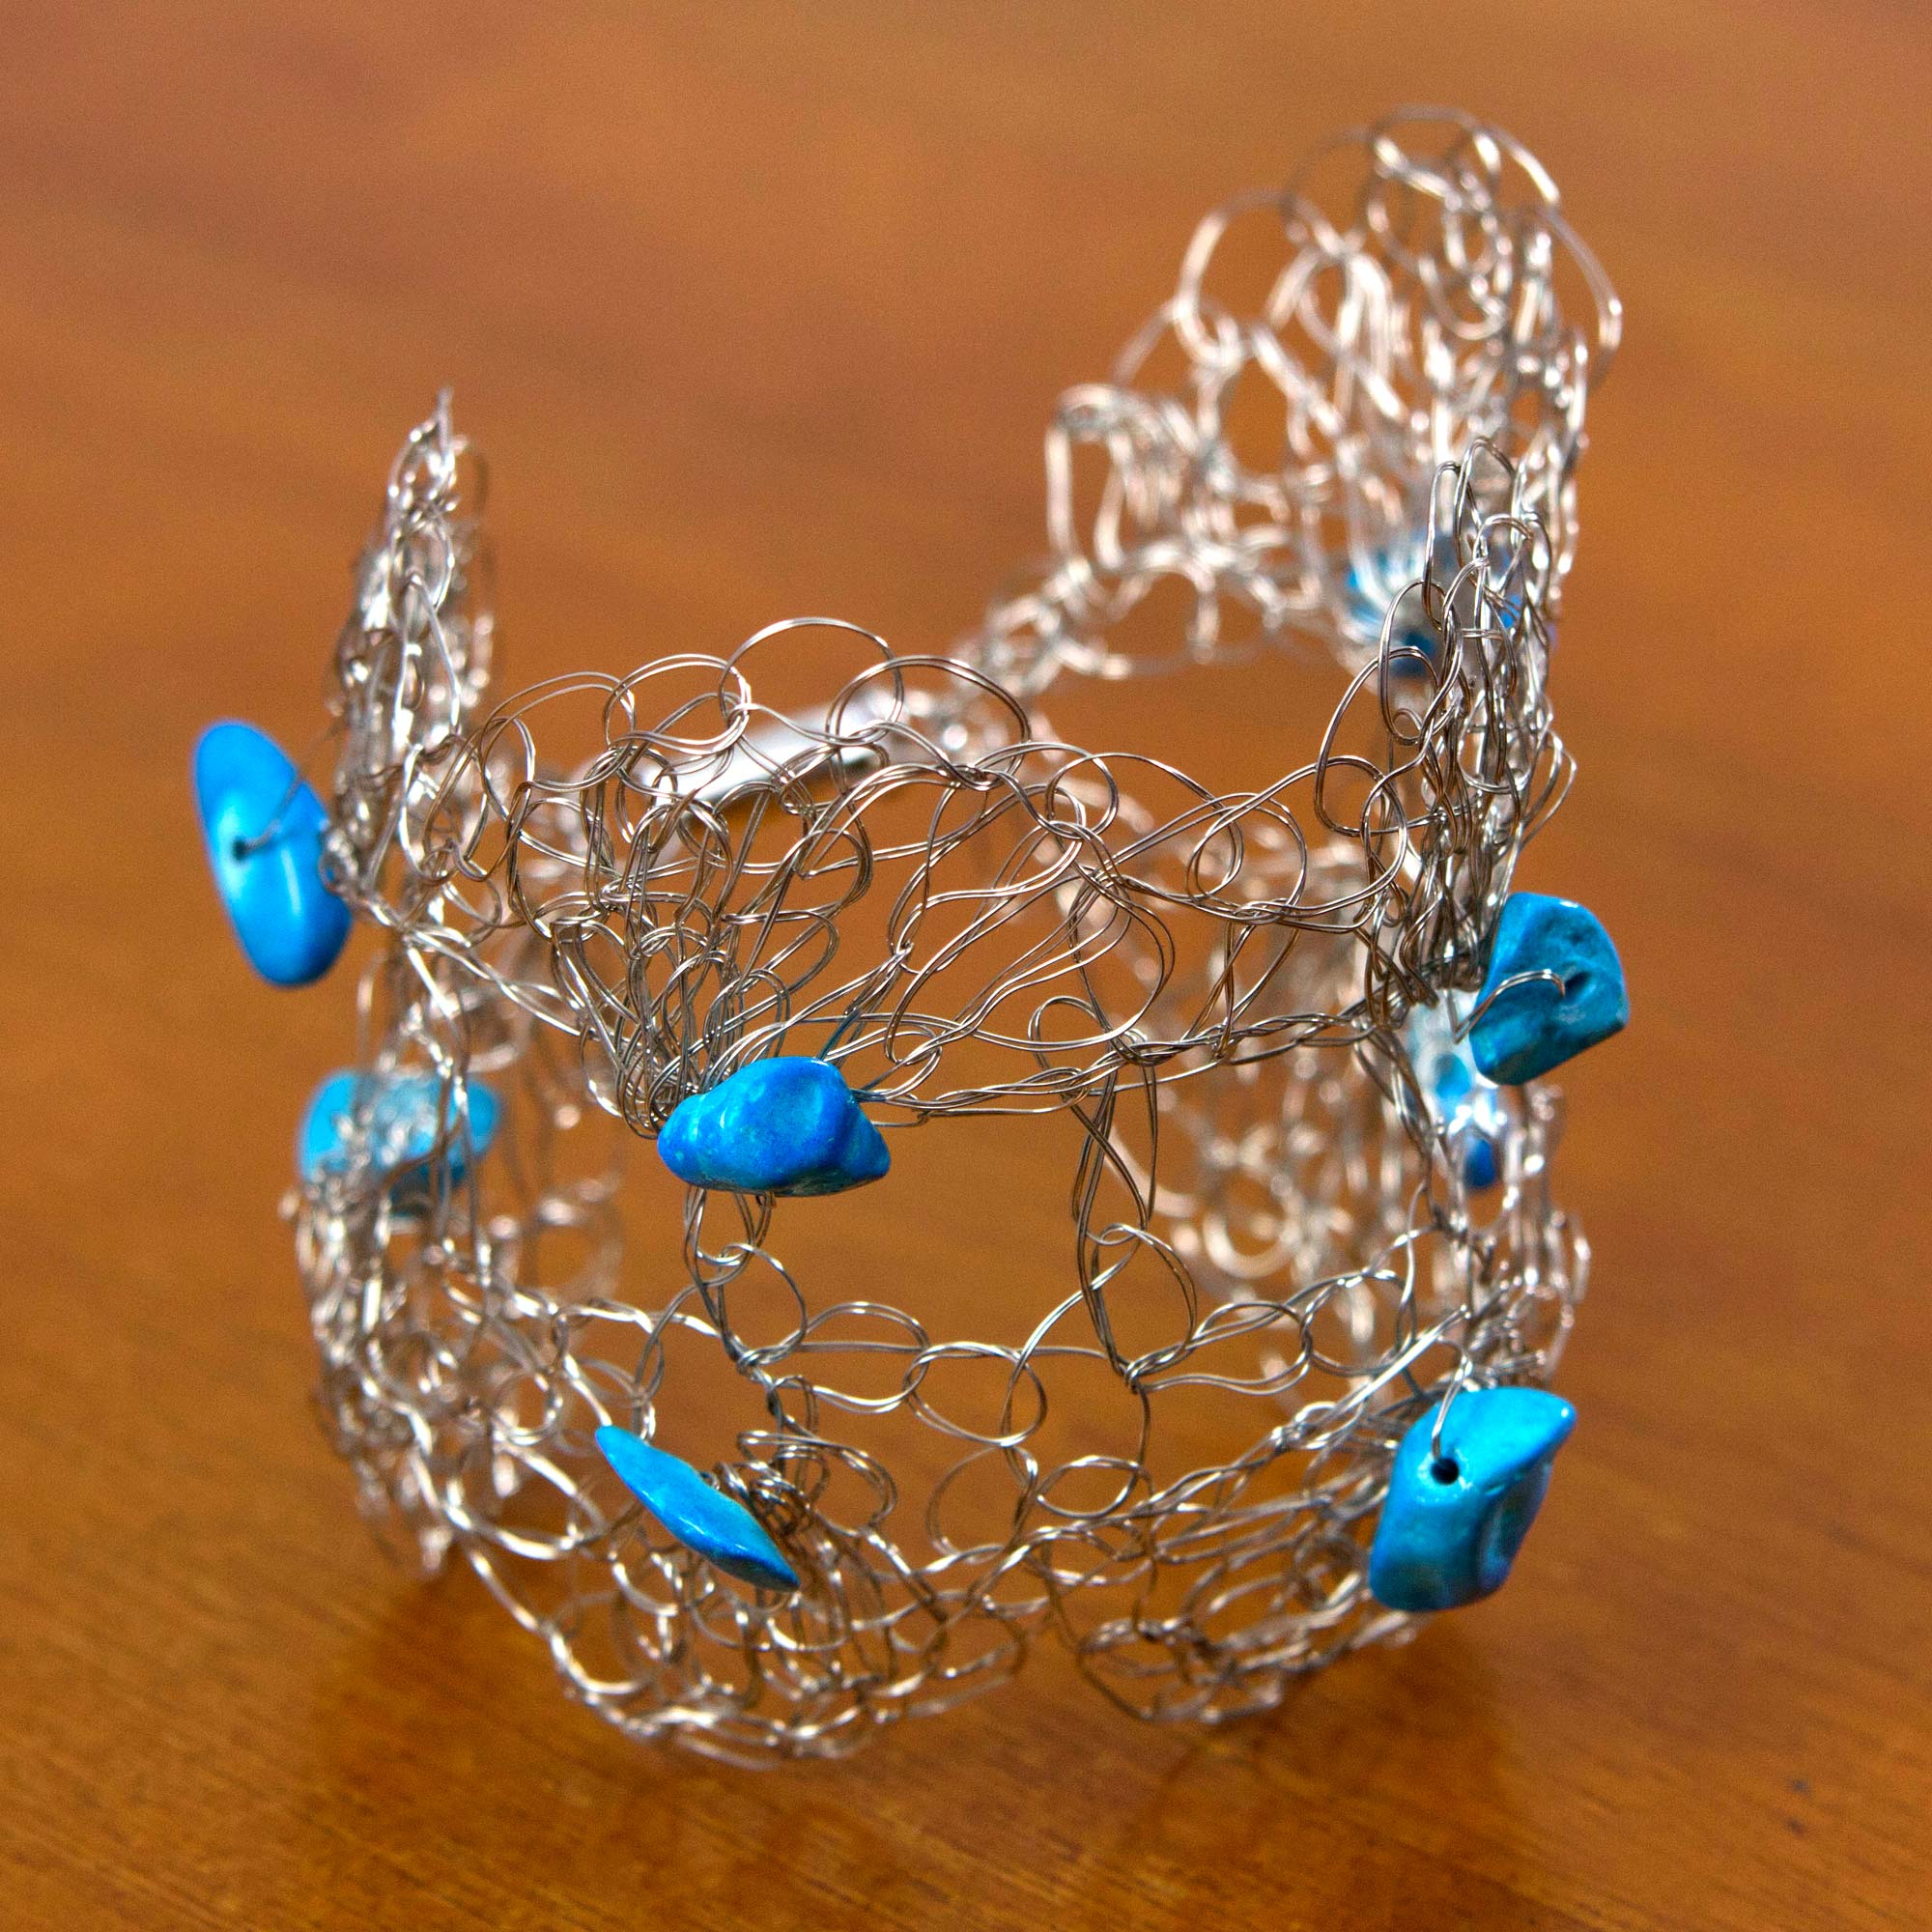 Crocheted Stainless Steel Cuff Bracelet with Blue Stones